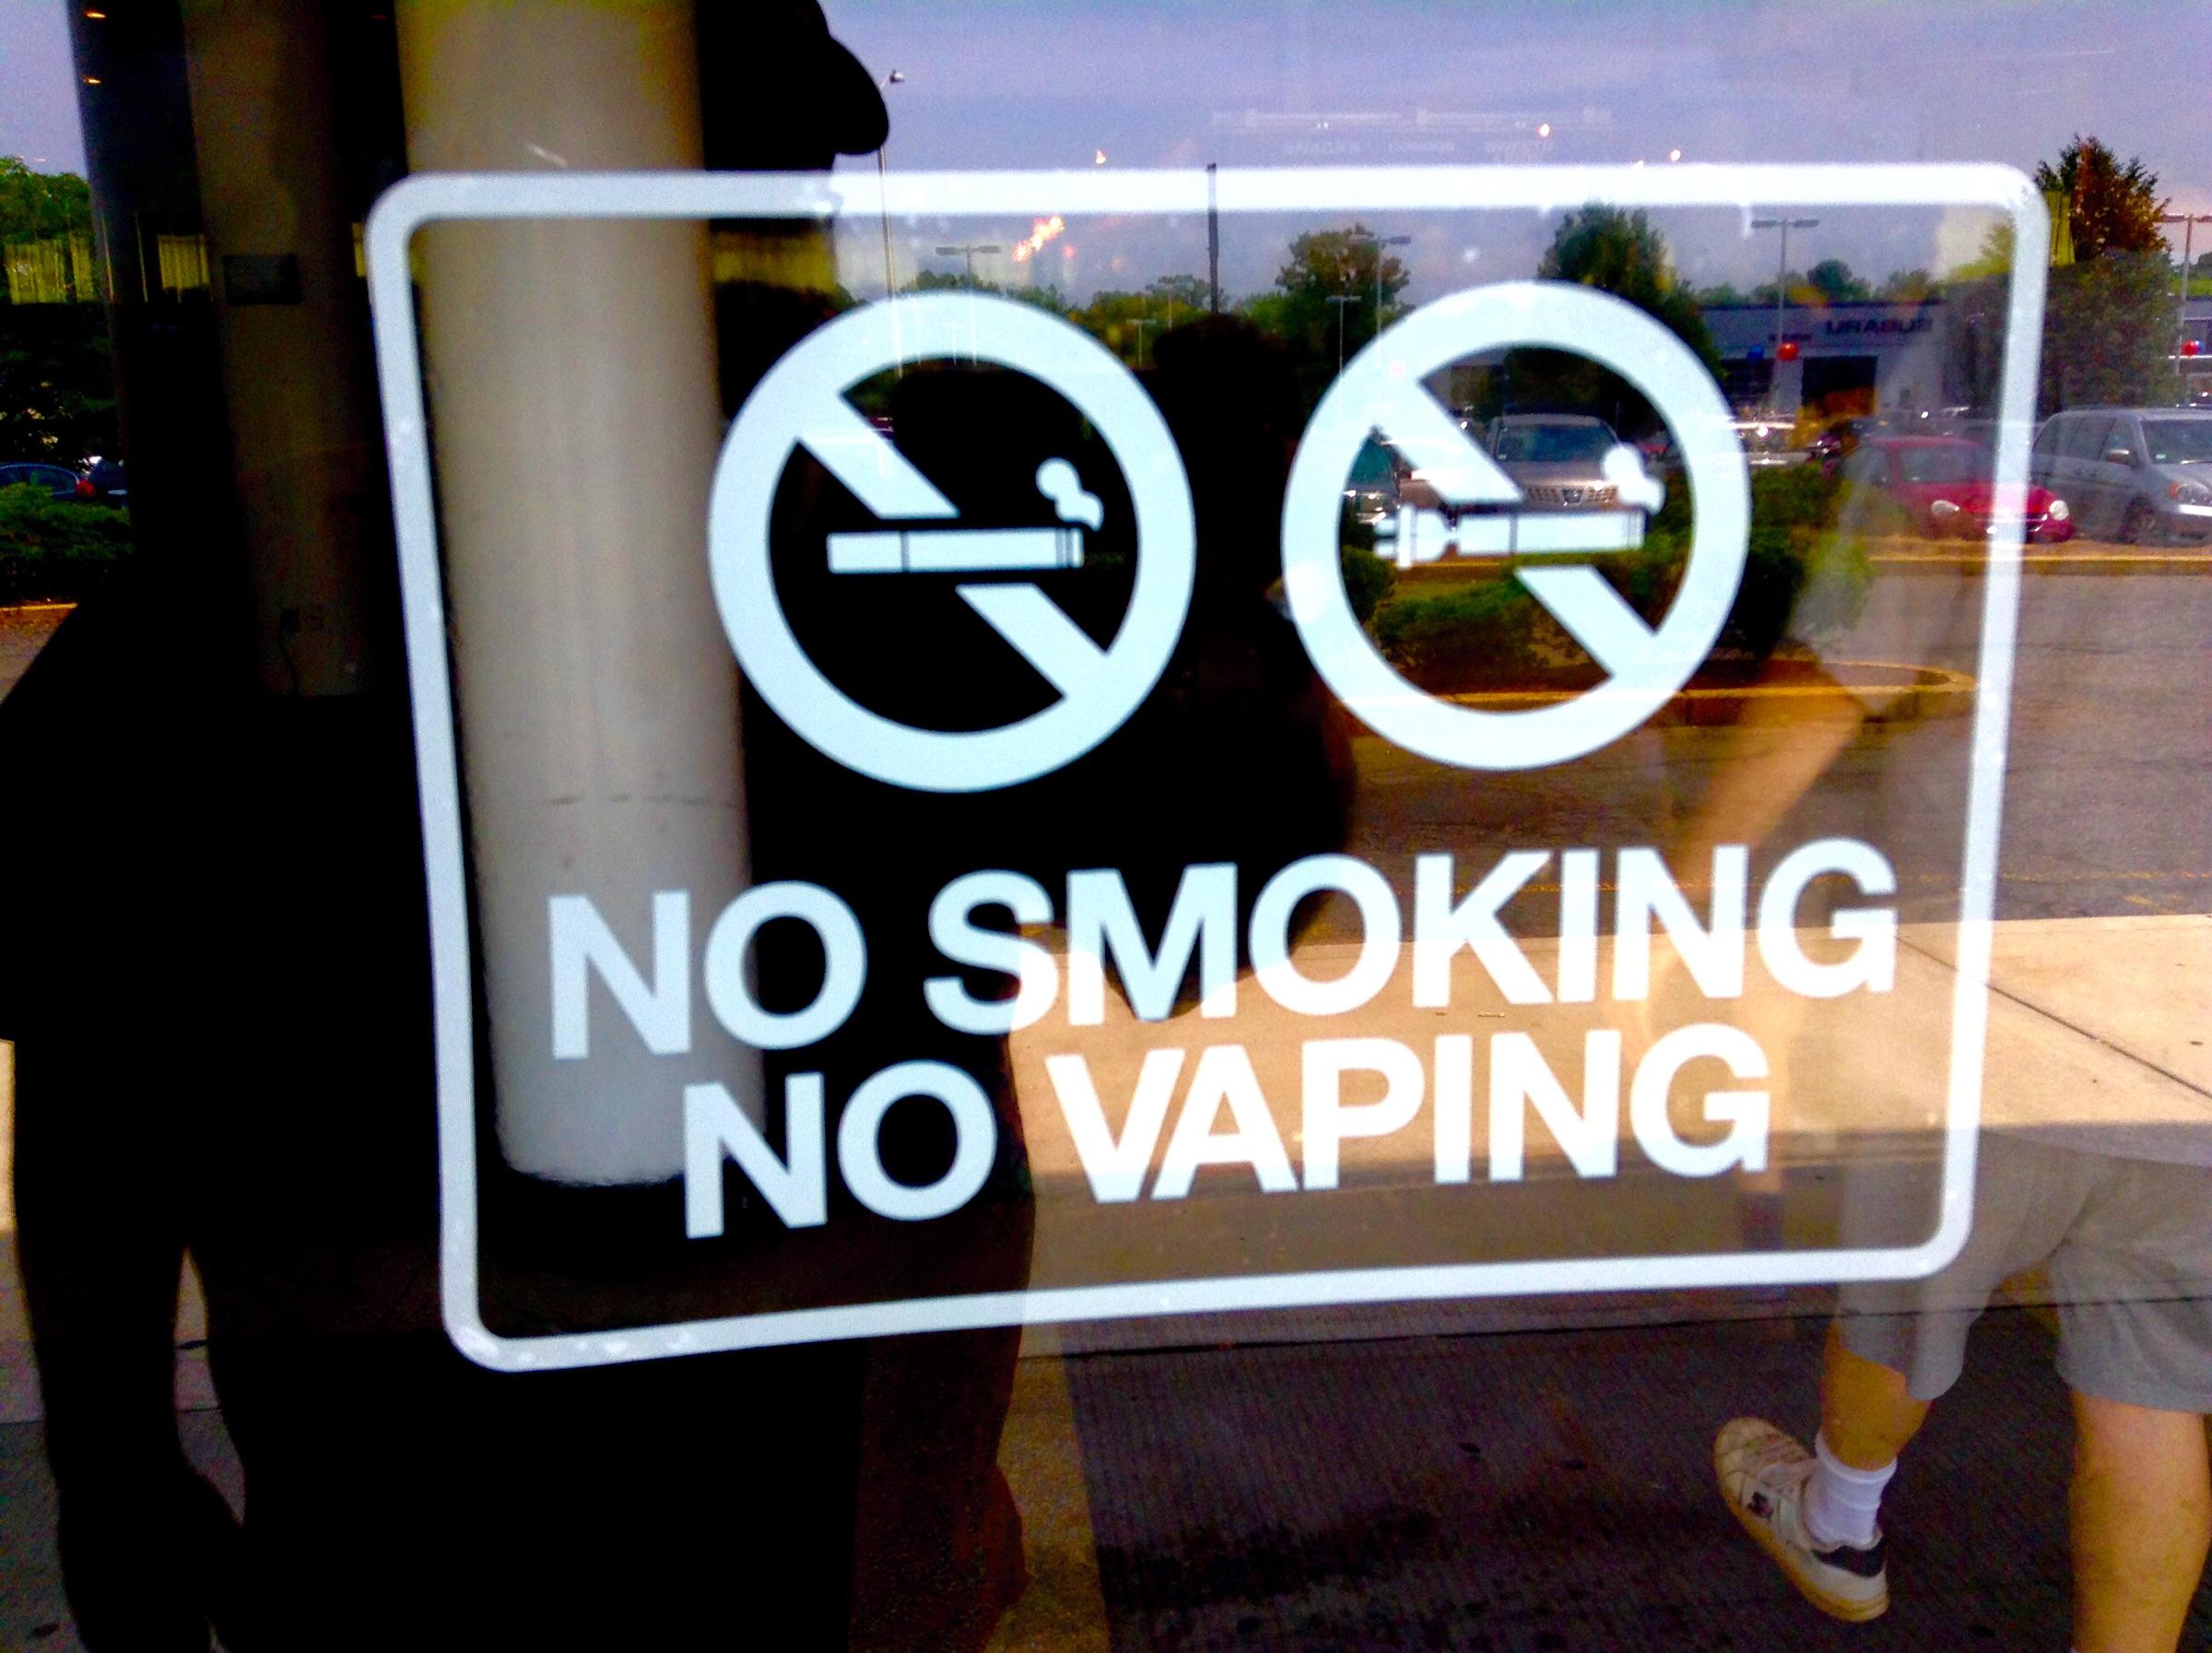 Vaping is Being Banned When it shouldn’t Be?